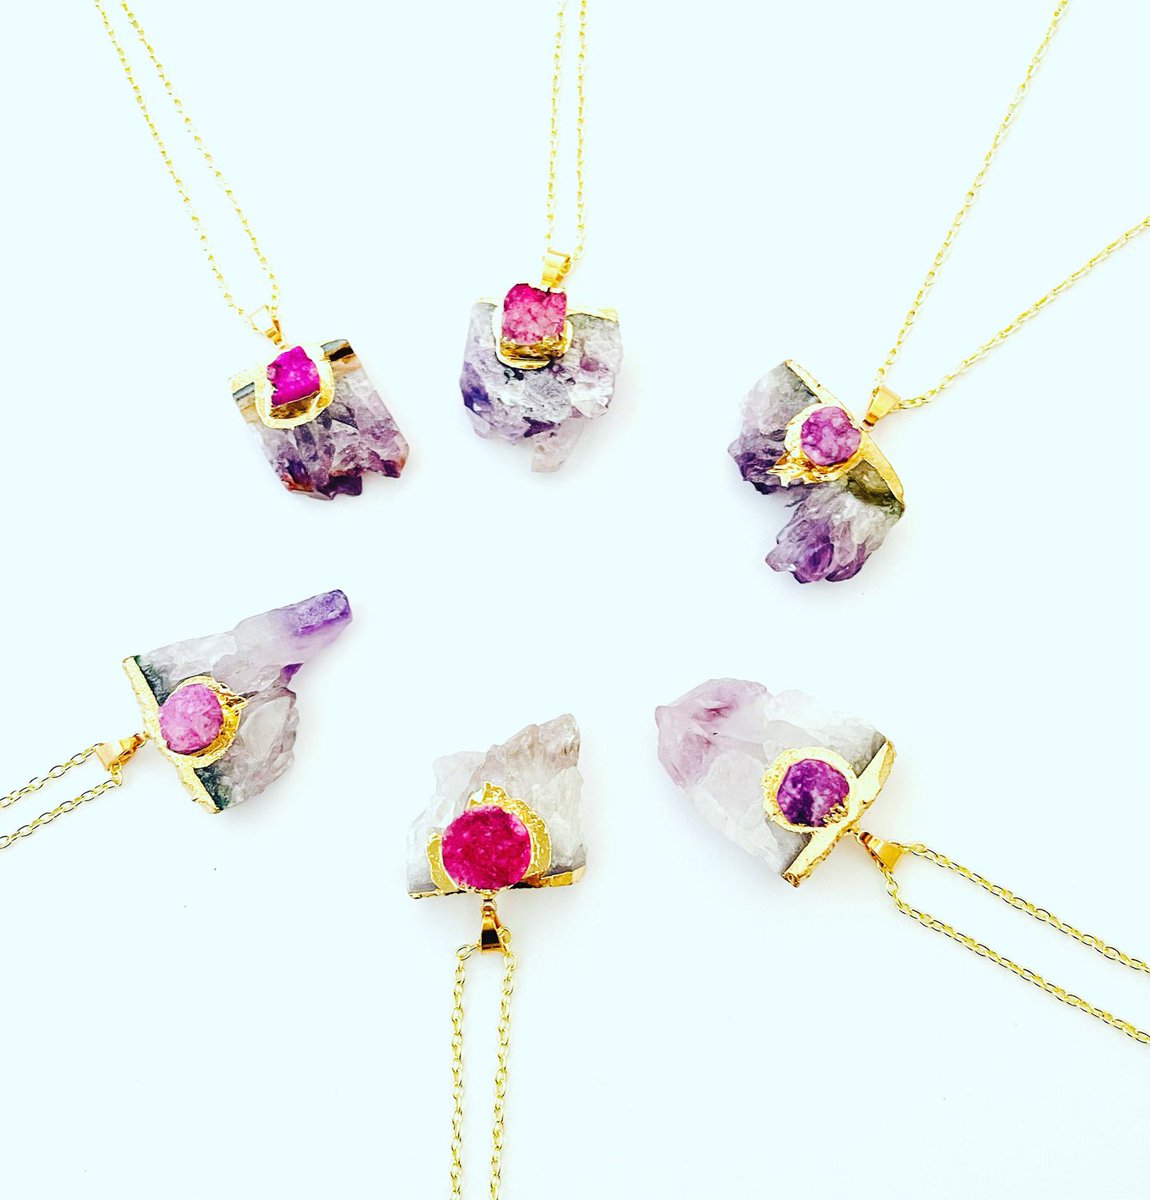 Excited to share this item from my #etsy shop: Amethyst Necklace - Raw Amethyst Pendant - Raw Gold Plated Amethyst Necklace - Raw Gemstones Necklace - Amethyst Jewelry etsy.me/4543NSC
#AmethystJewelry #AmethystNecklace #RawAmethyst #Jewelry #EtsyFinds #ShopSmall